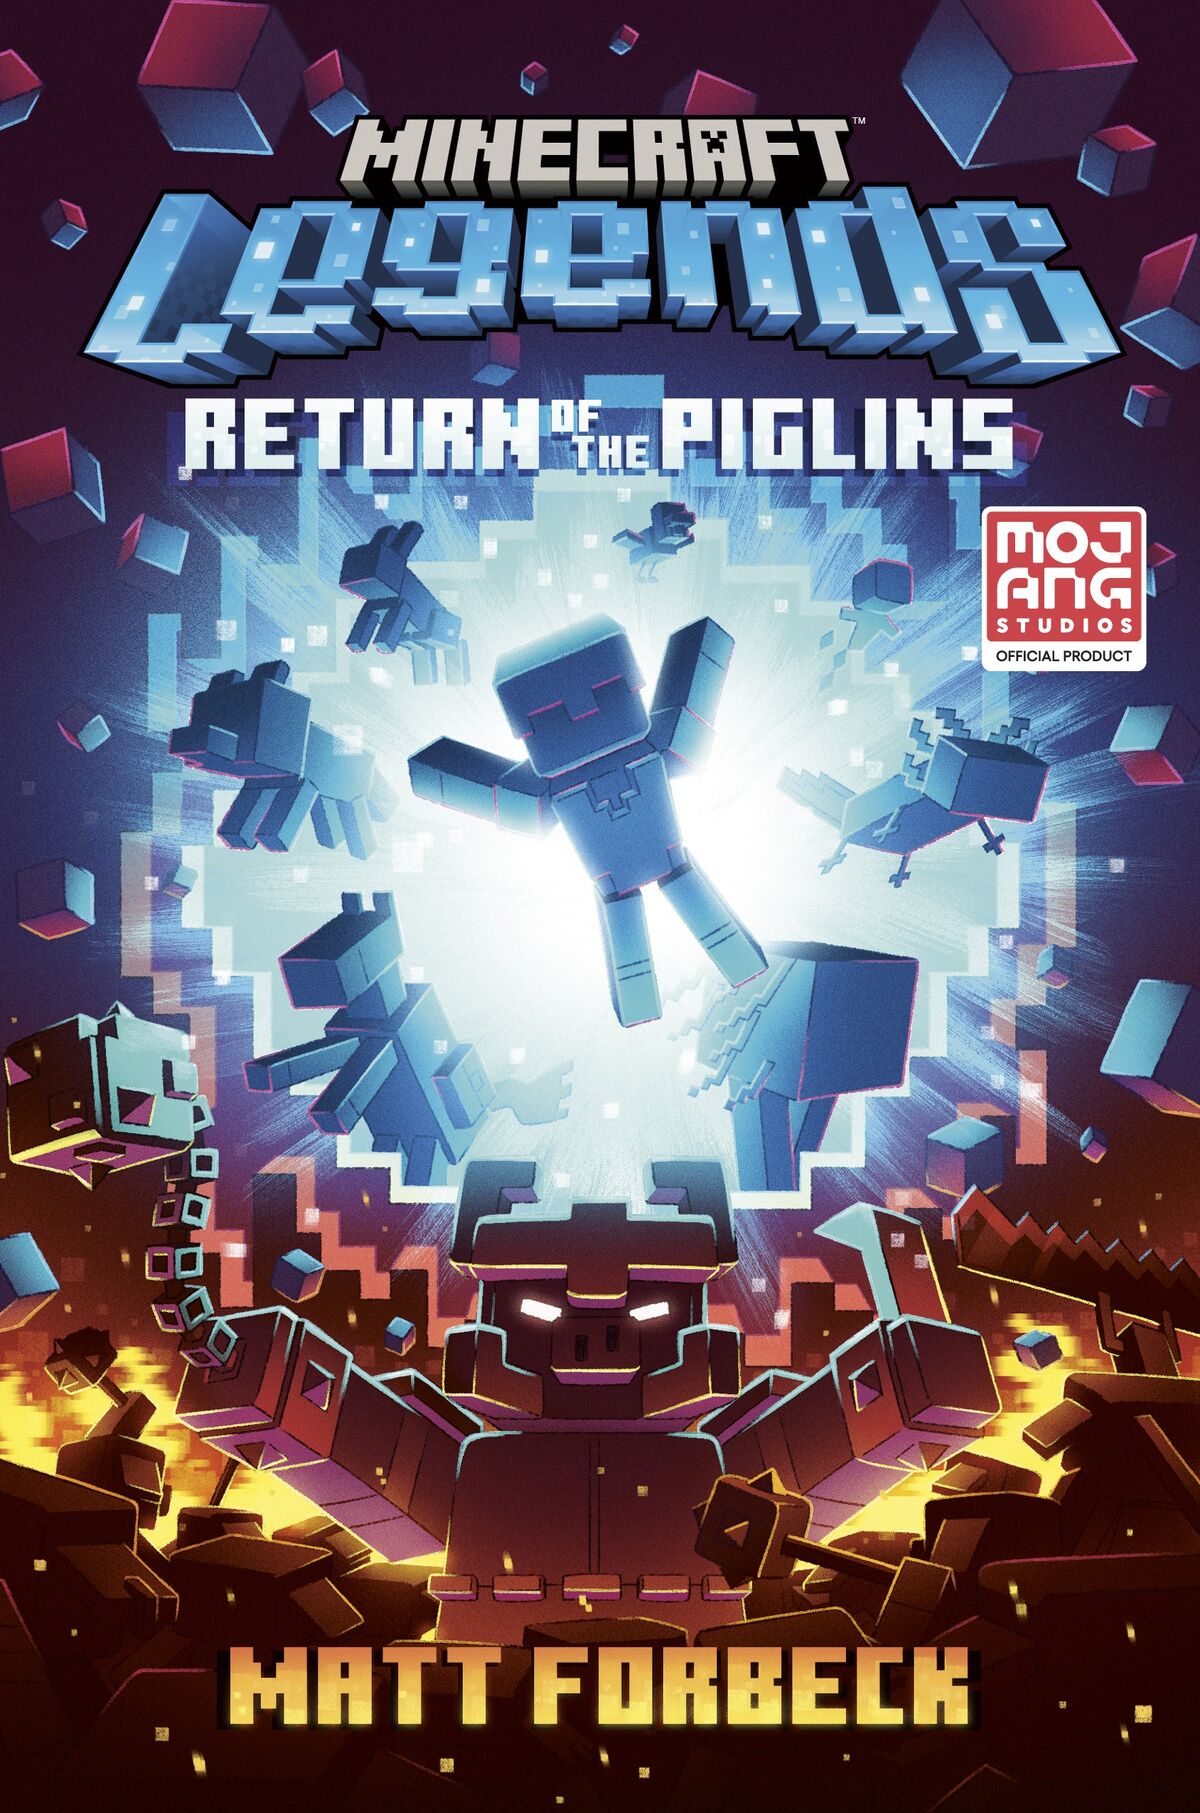 Minecraft Legends - The Piglins - Mobile Abyss